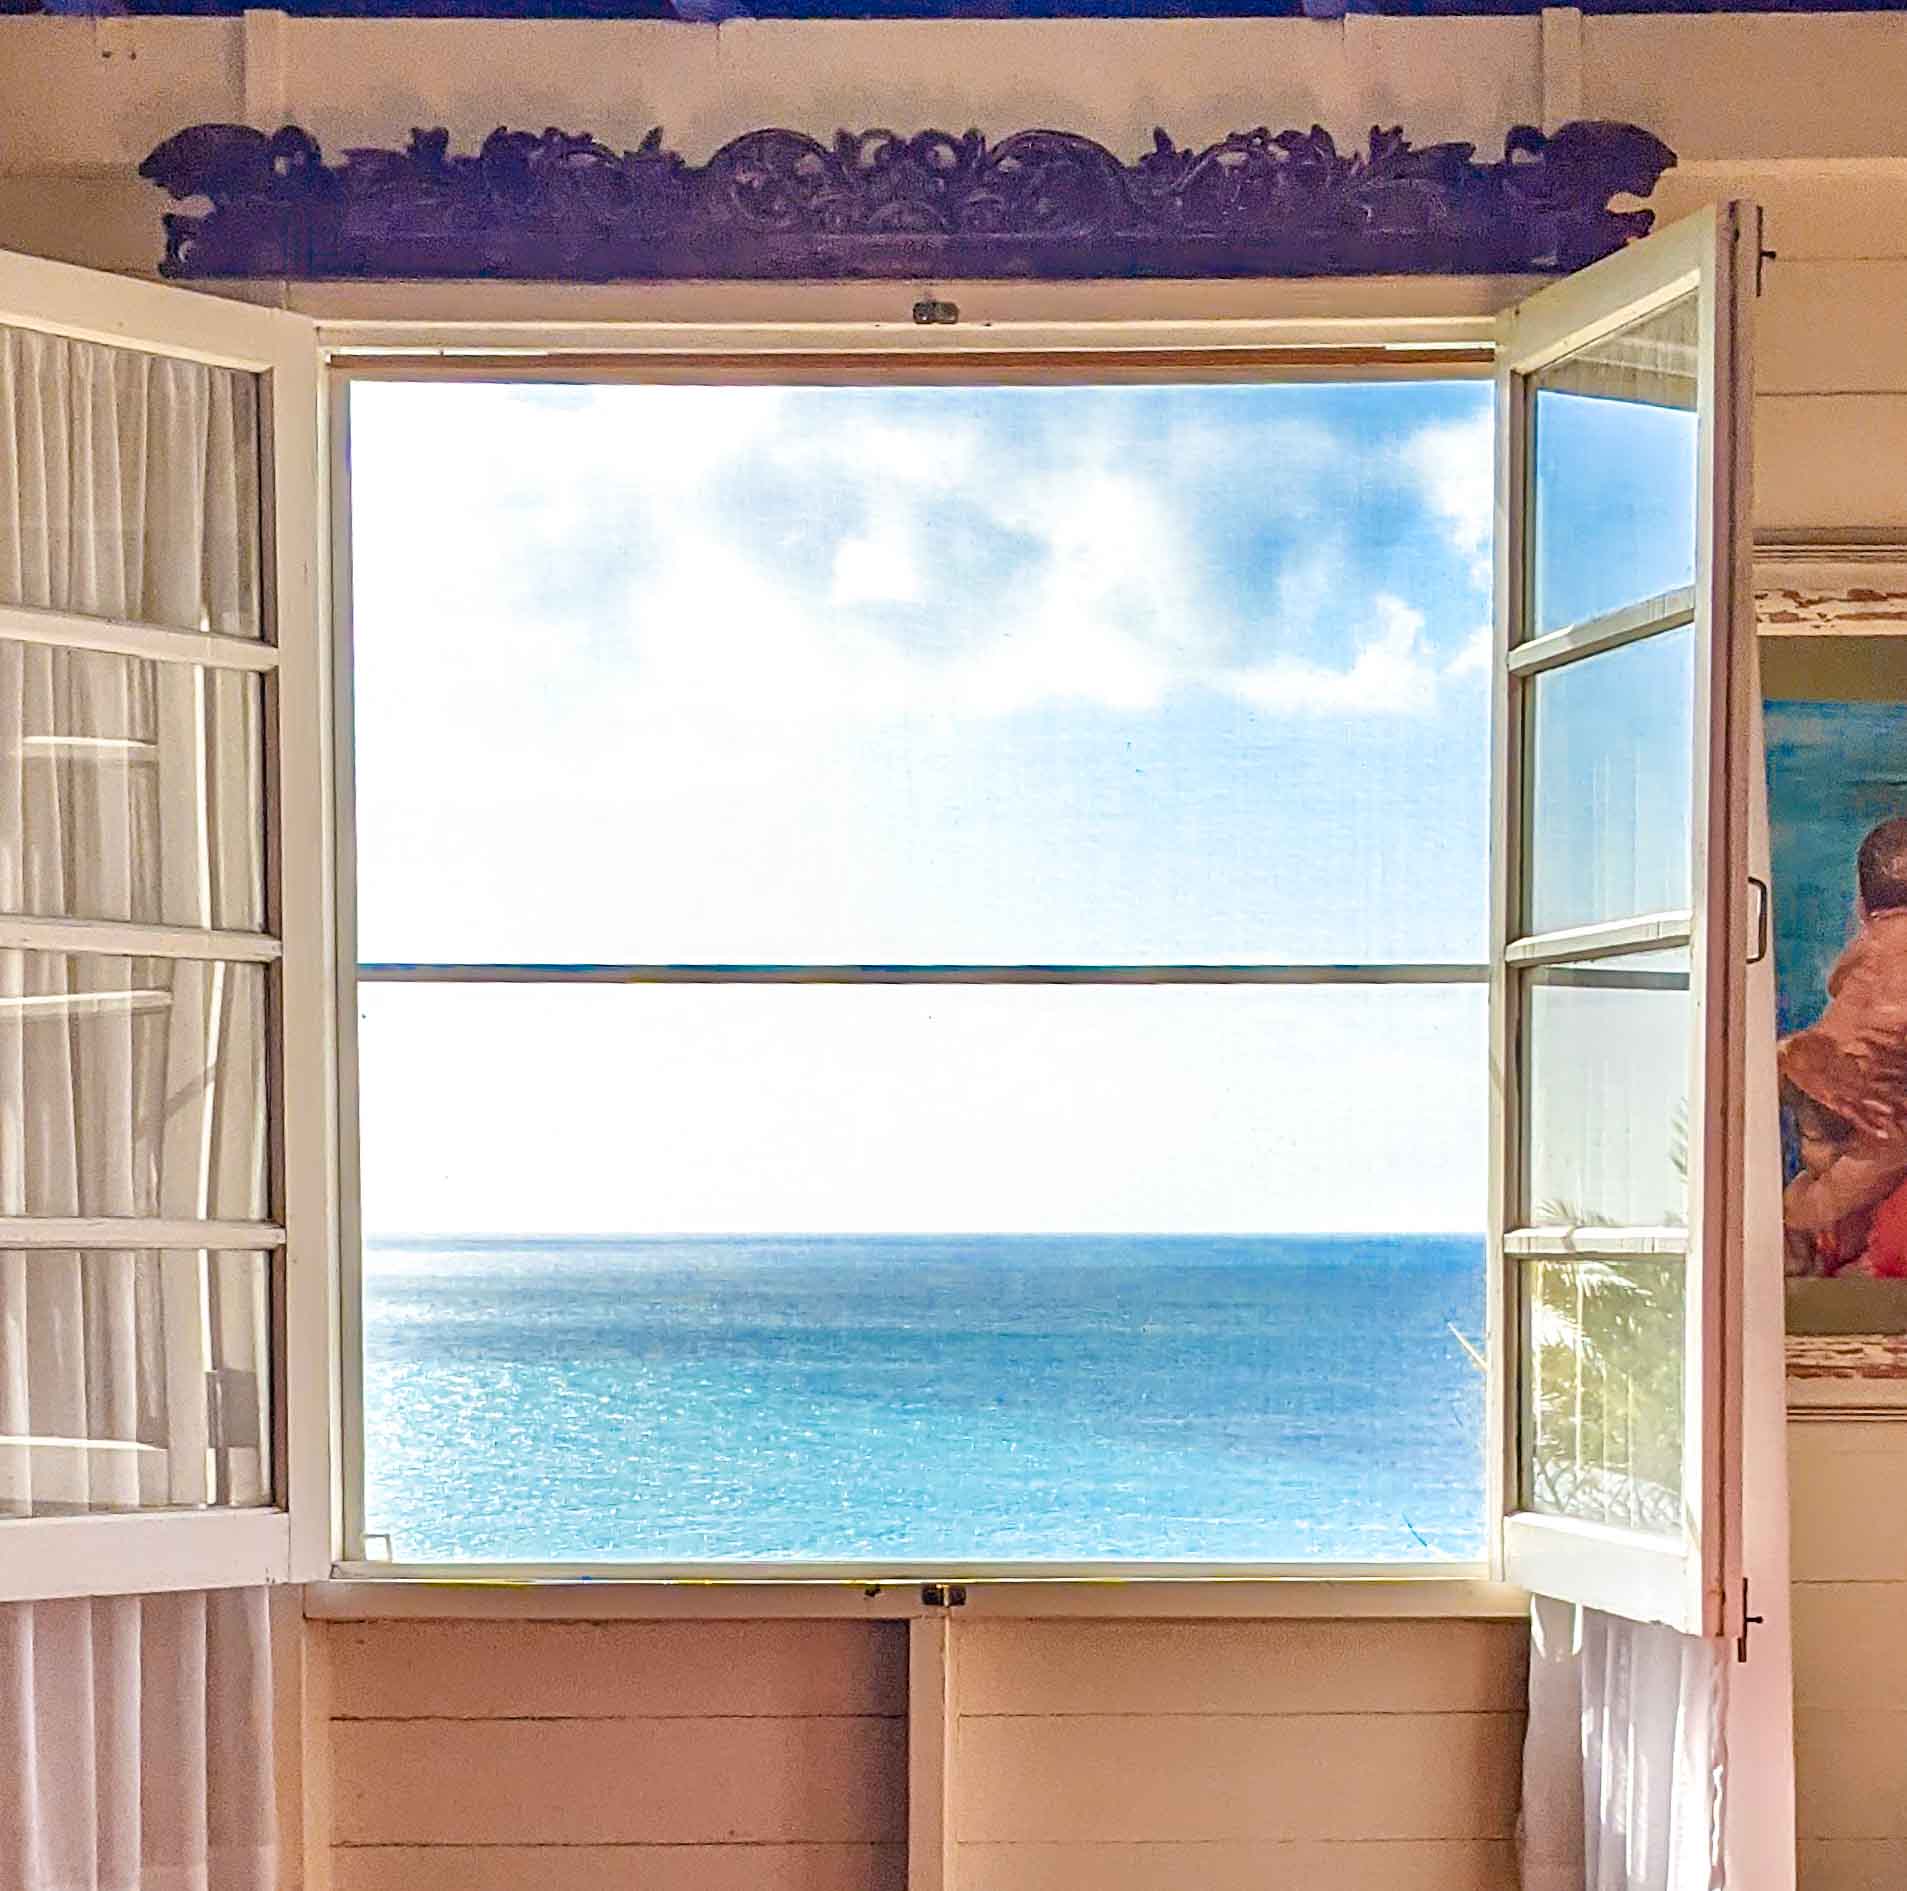 Window with view of beach sea and sky at Galley Bay Cottages #antigua #visitantigua #caribbeantravel